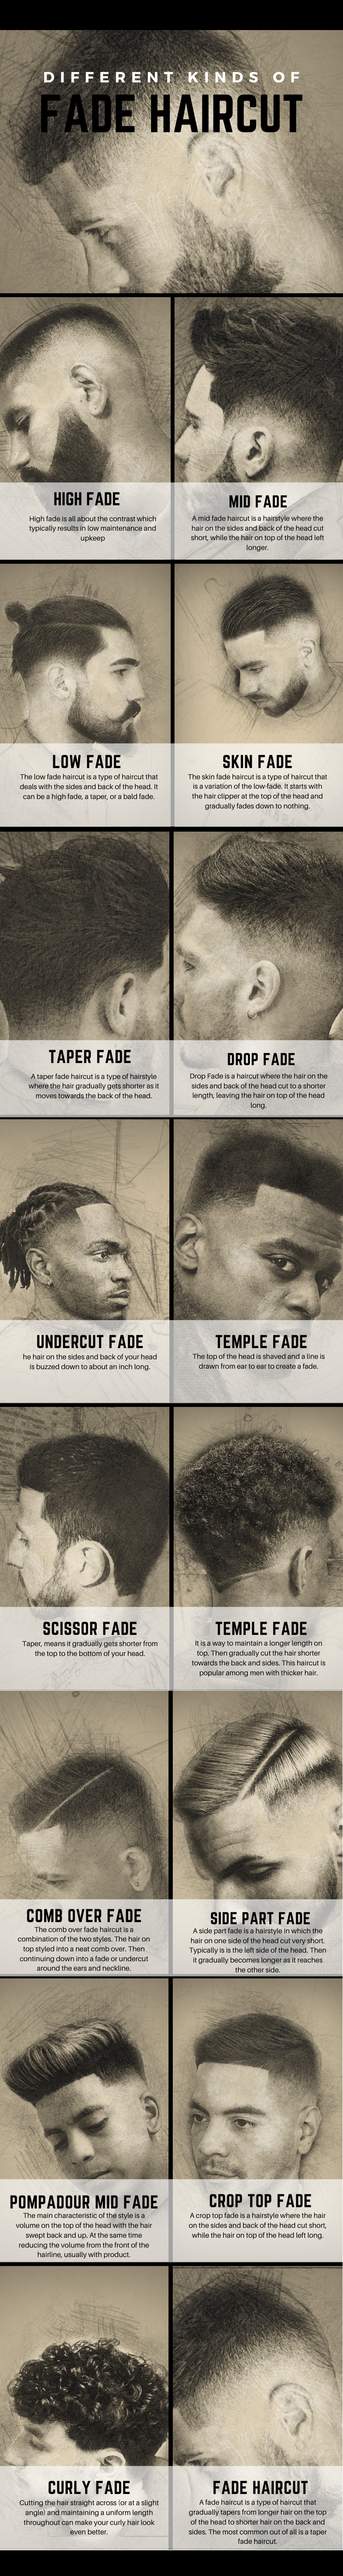 Different Kinds Of Fade Hair Cut |infographic| |Health & Beauty|